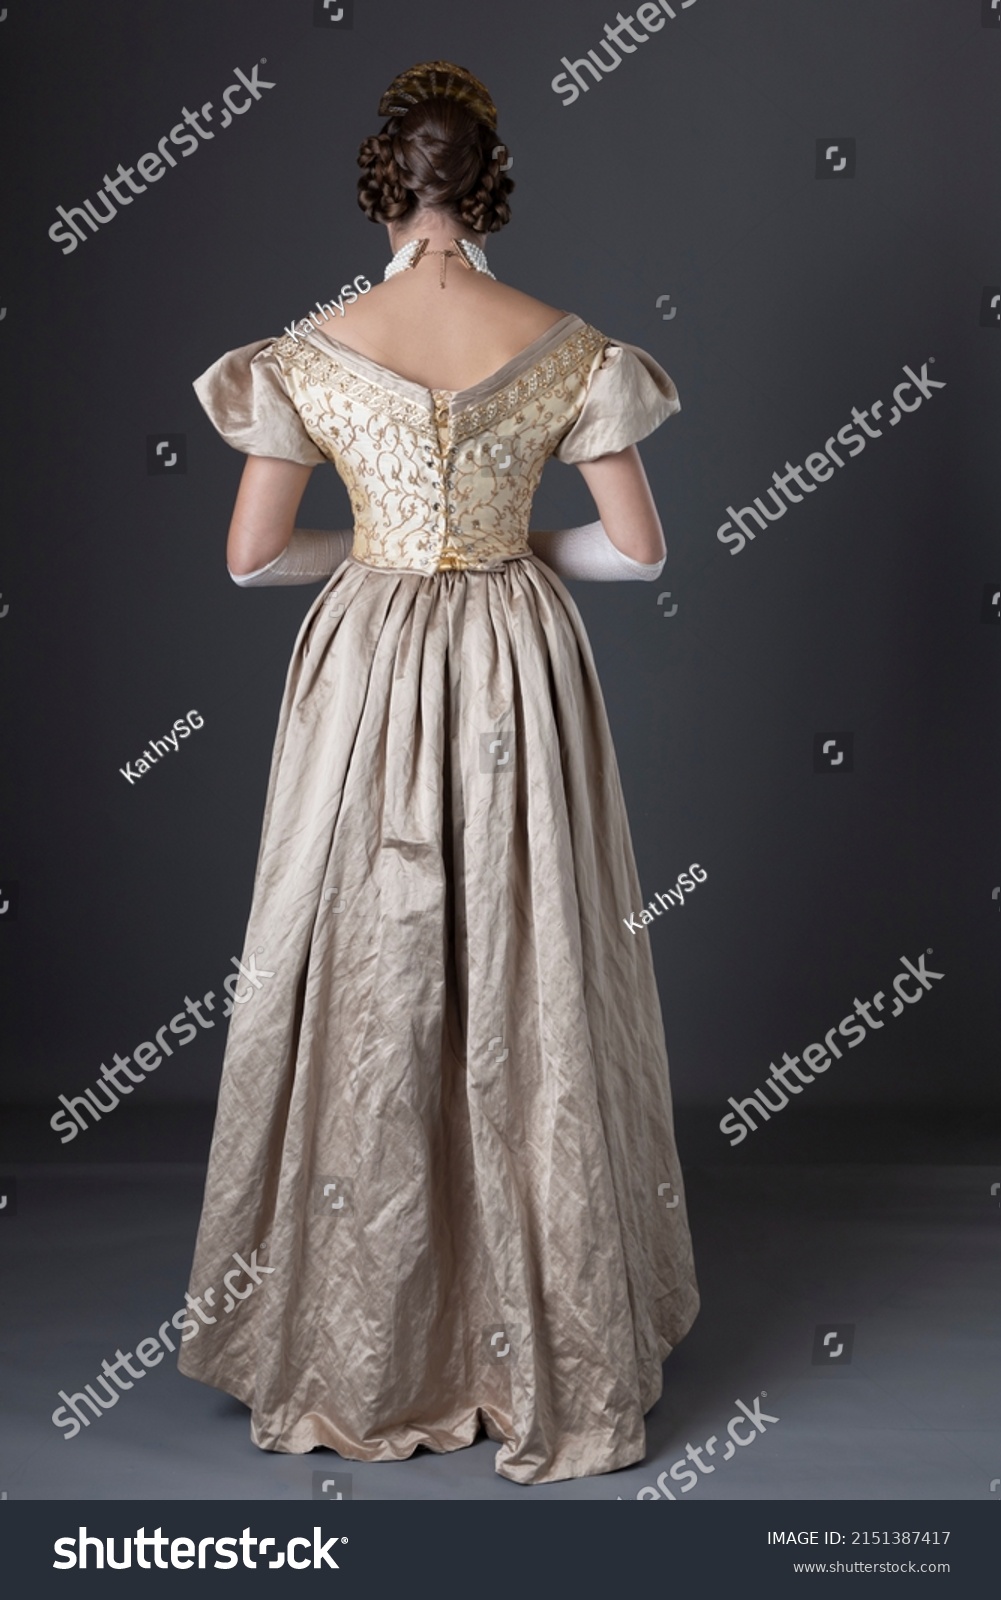 A Victorian woman wearing a gold ball gown with long, fingerless lace gloves and standing against a studio backdrop #2151387417